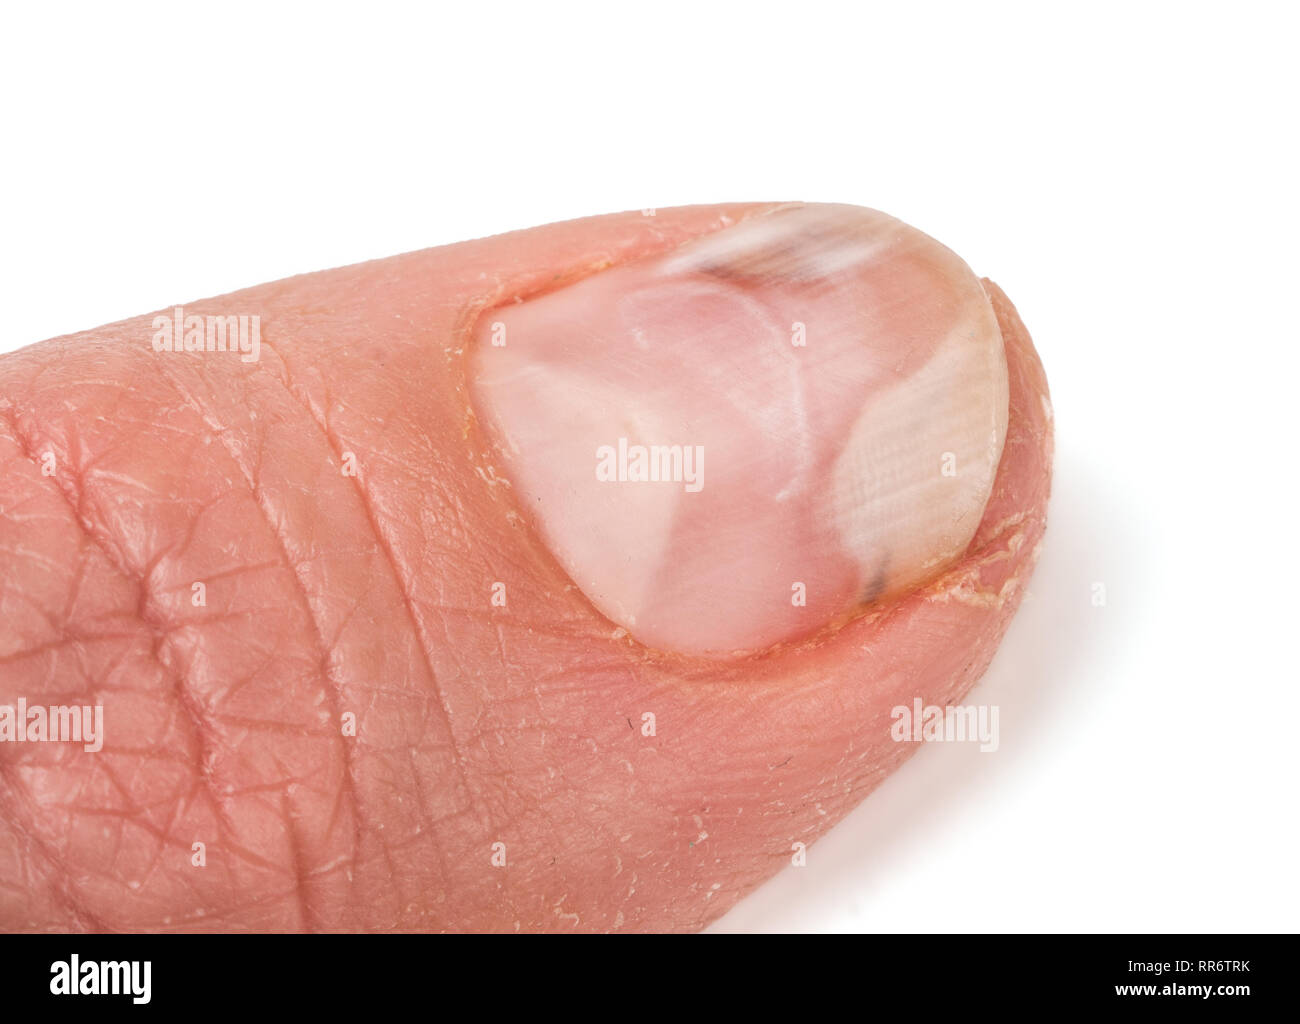 one finger of the hand with a fungus on the nails isolated white background Stock Photo